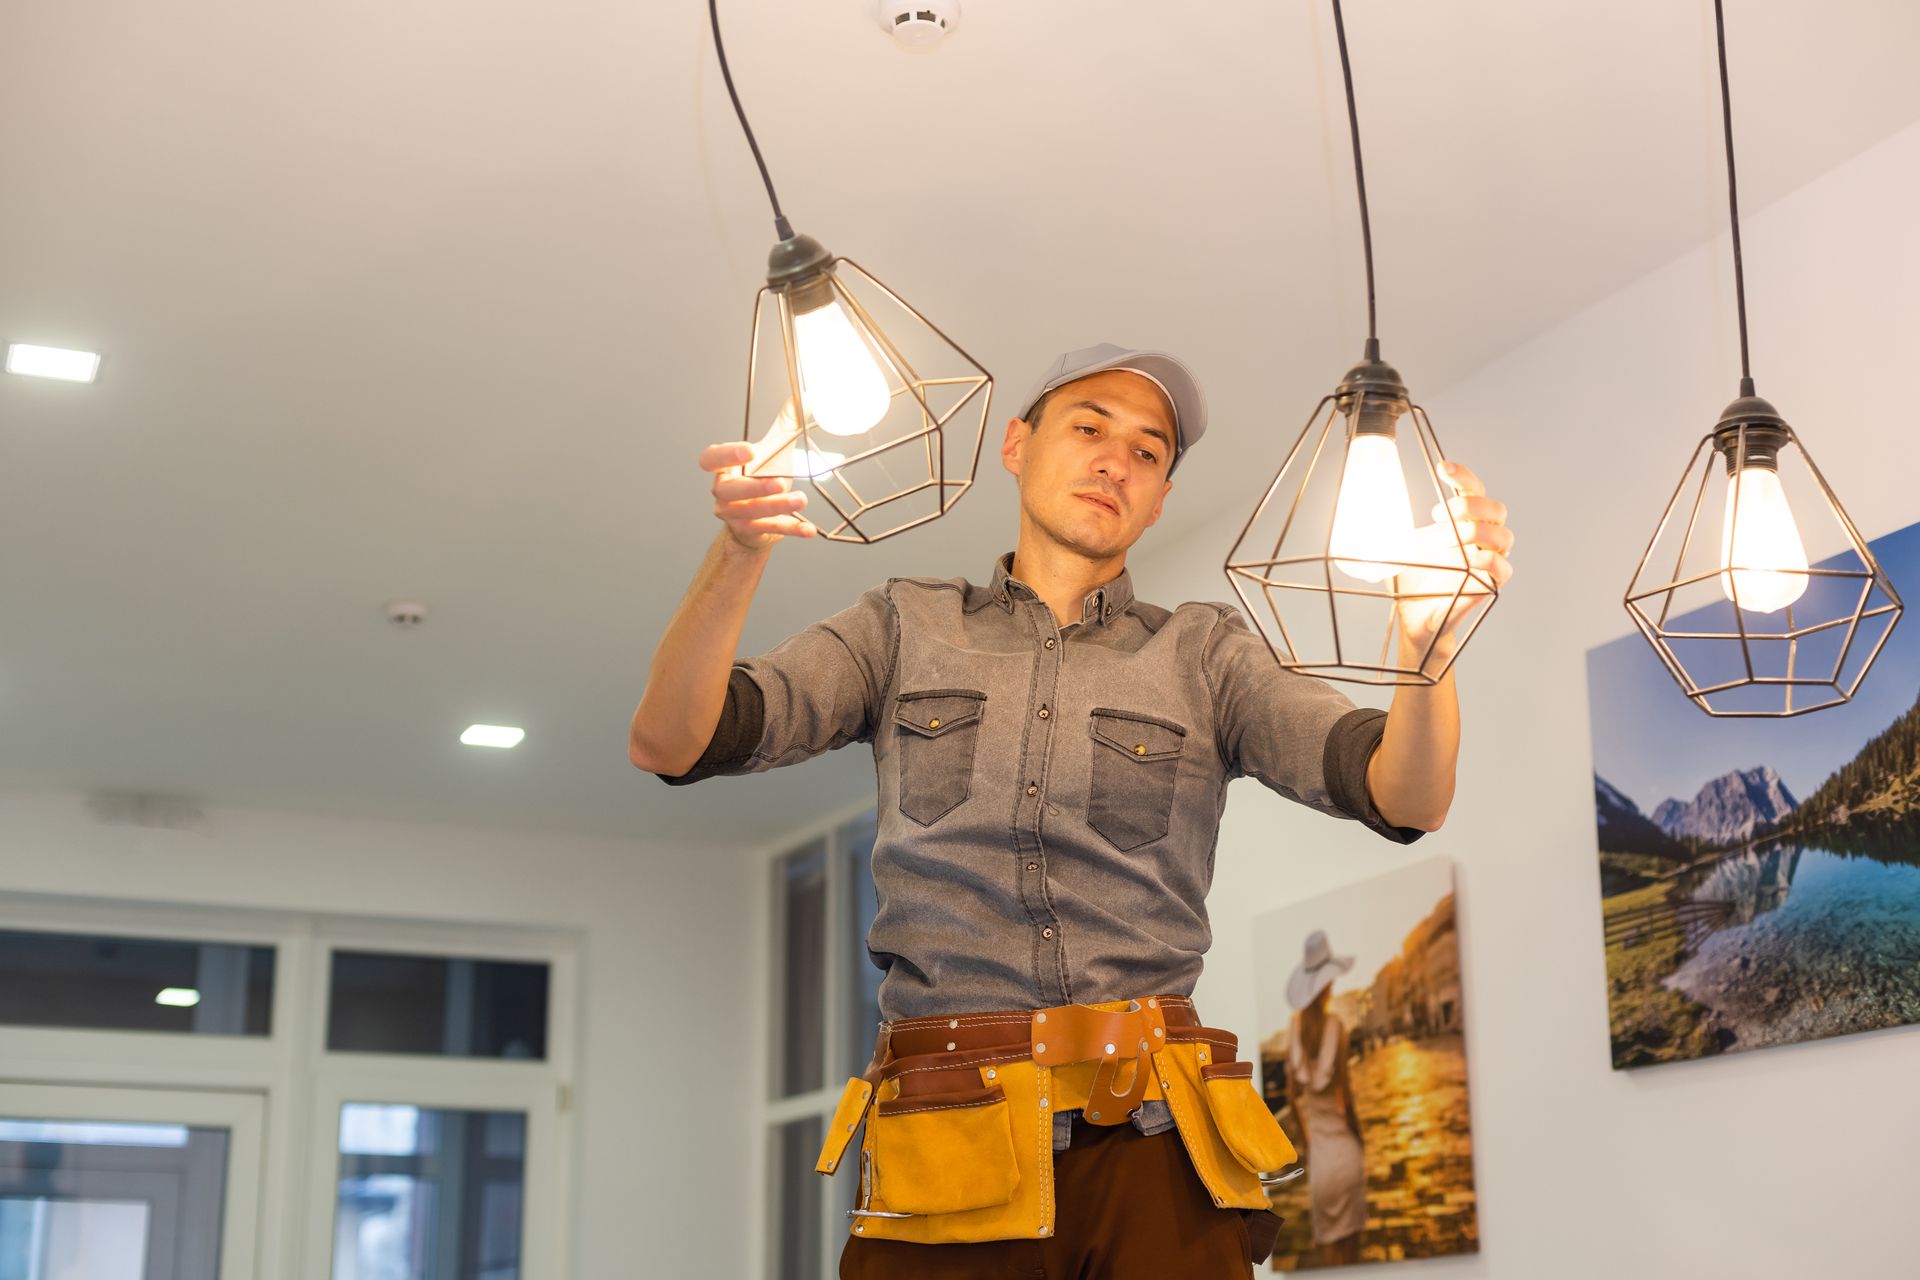 Worker installation electric lamps light